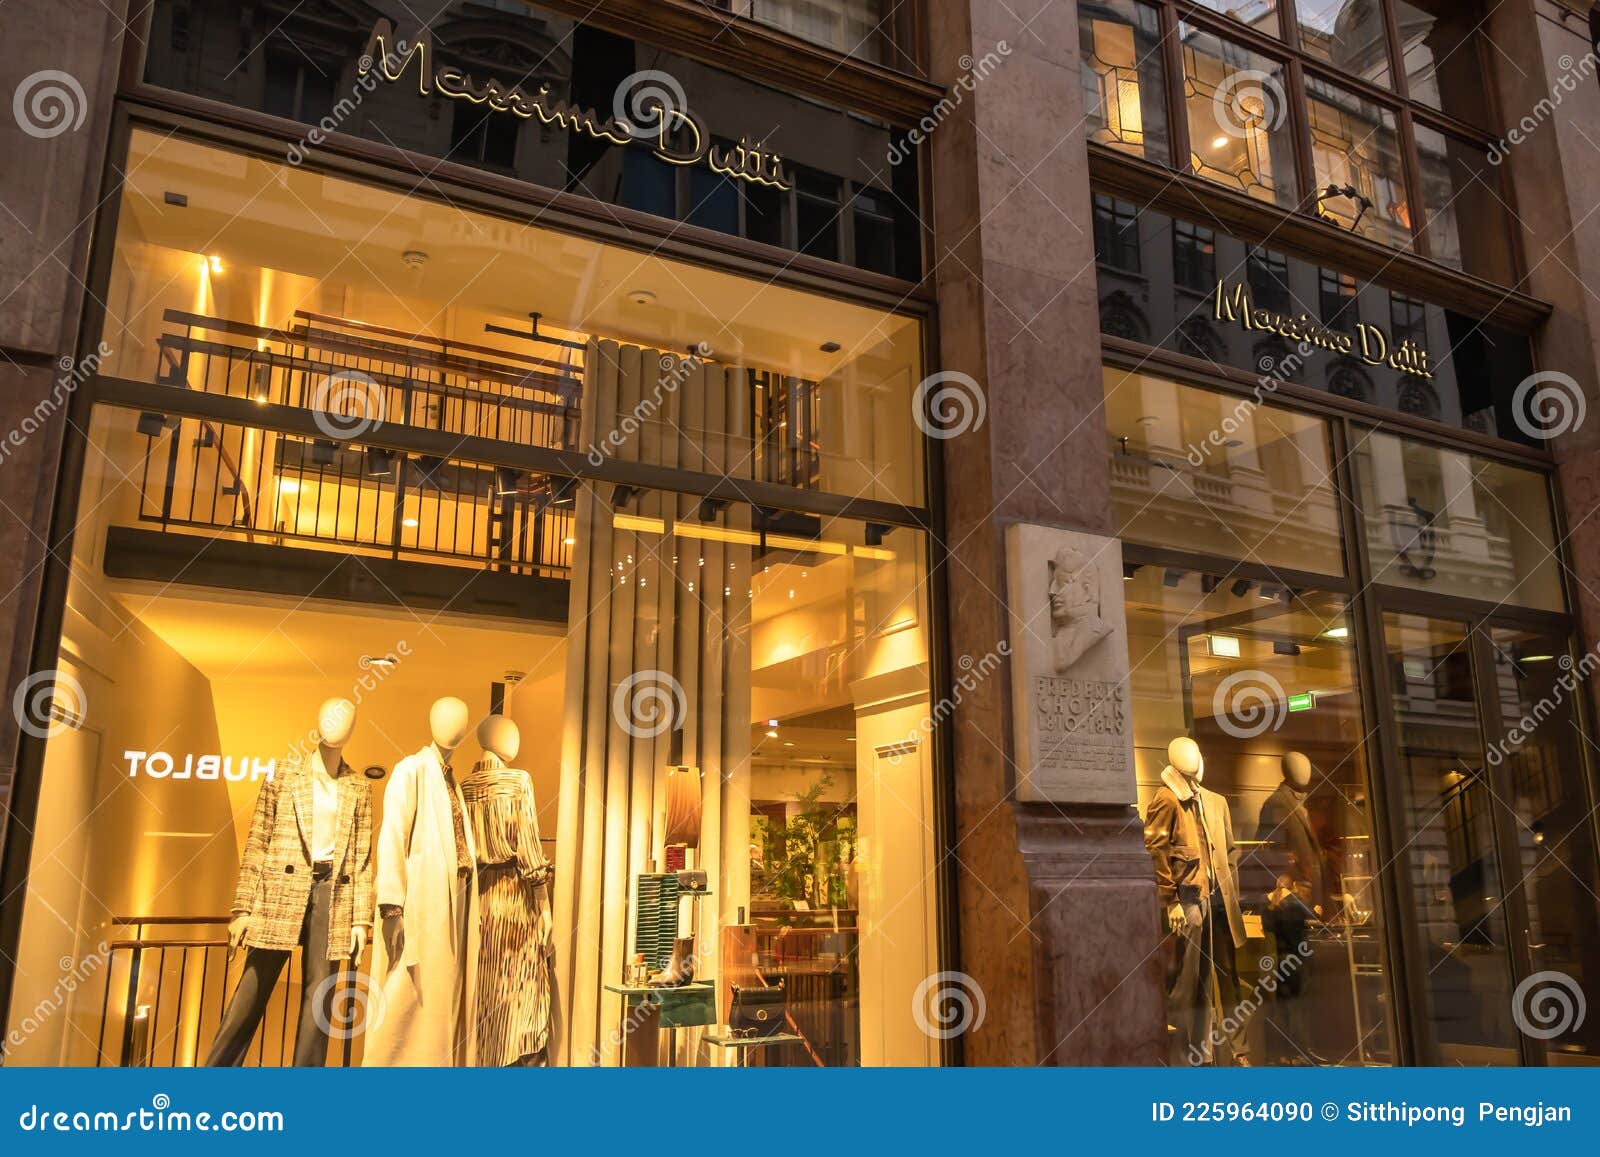 monteren recorder Laatste View of Massimo Dutti Front Store, a Spanish Clothes Manufacturing Company  that is Part of the Inditex Group, in a Street of Vienn Editorial Image -  Image of germany, brand: 225964090